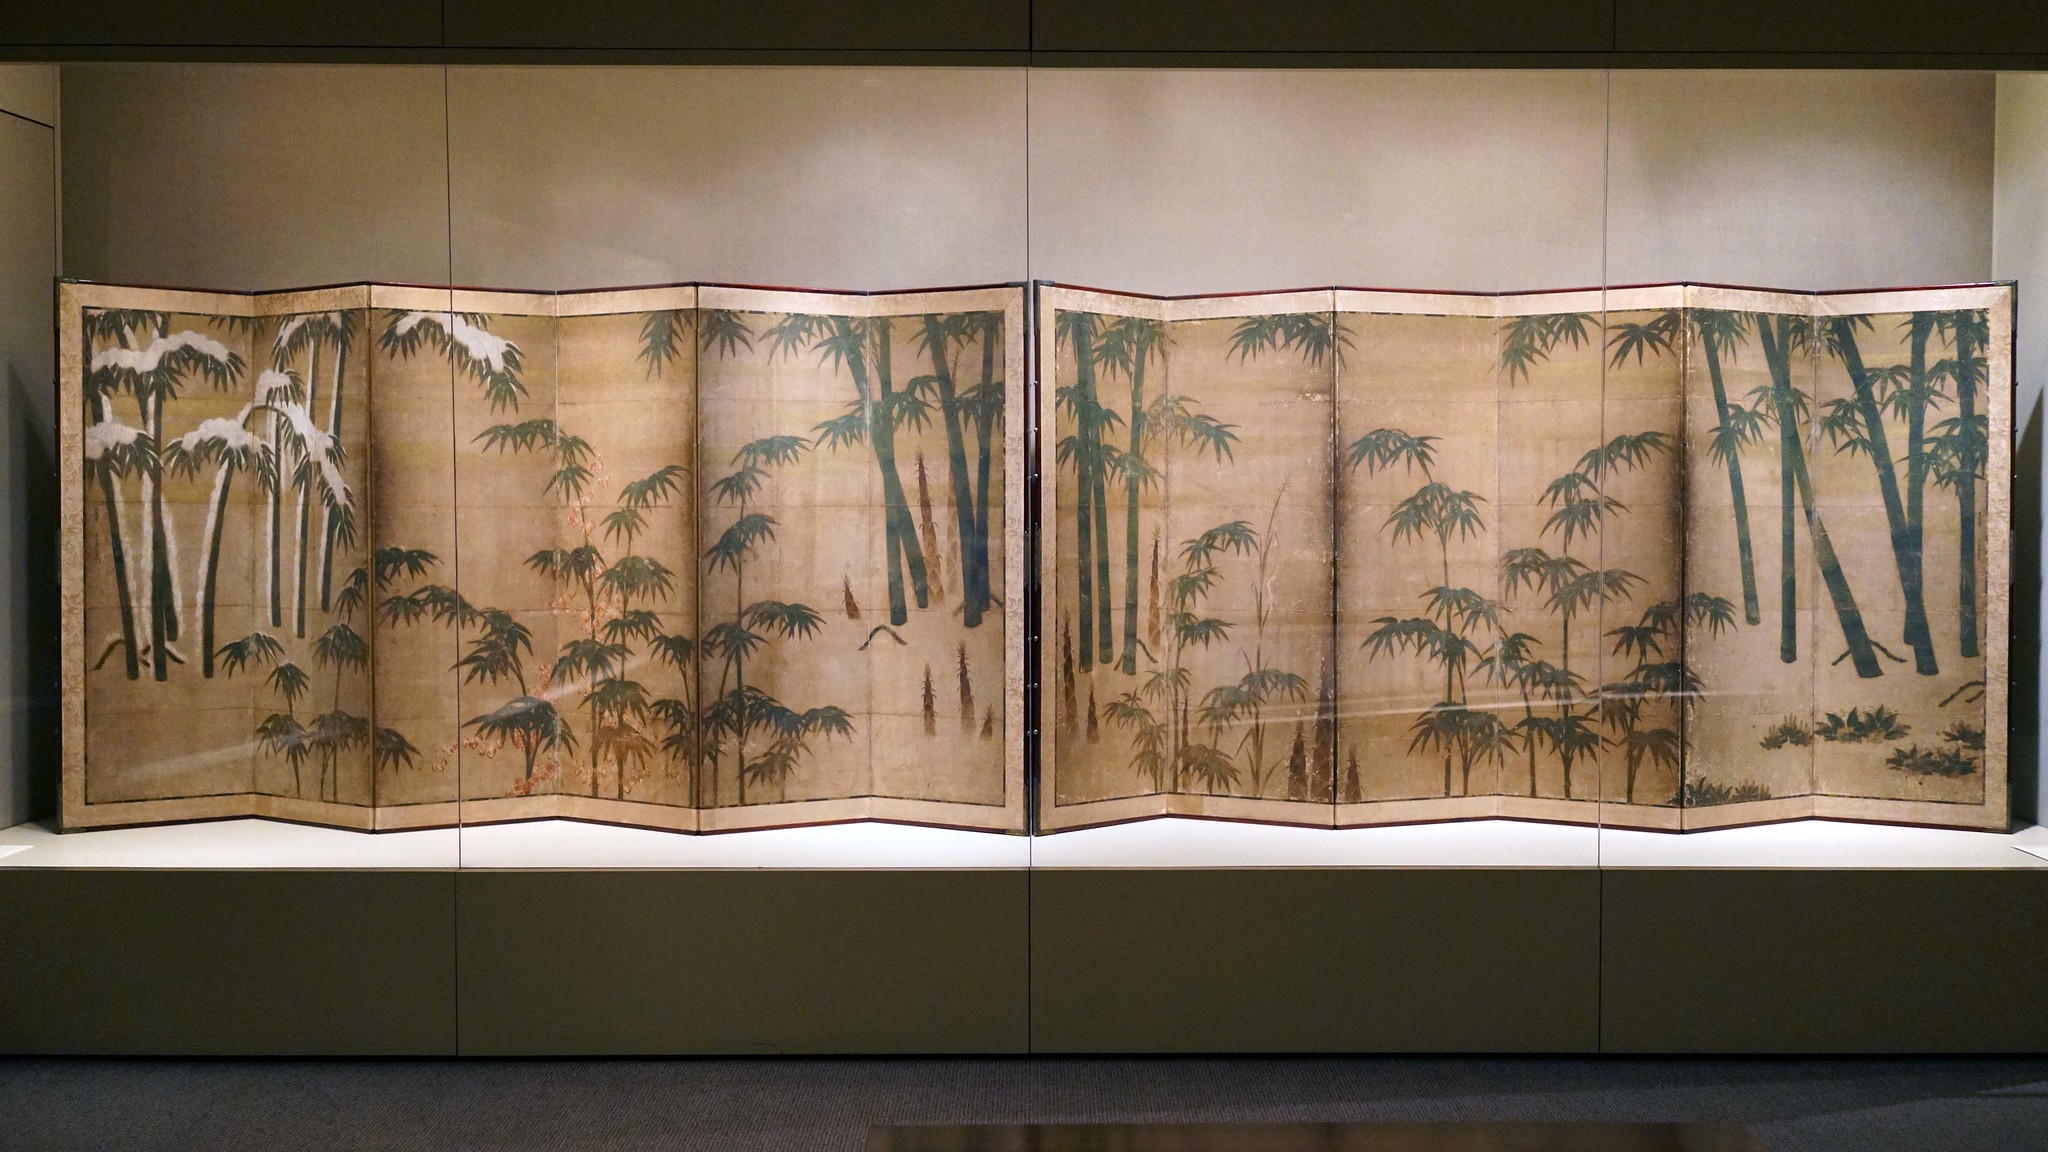 Tosa Mitsunobu (attribution), Bamboo in the Four Seasons, late 15th–early 16th century (Muromachi period), pair of six-panel screens; ink, color, gold leaf on paper, 157 × 360 cm each (The Metropolitan Museum of Art)